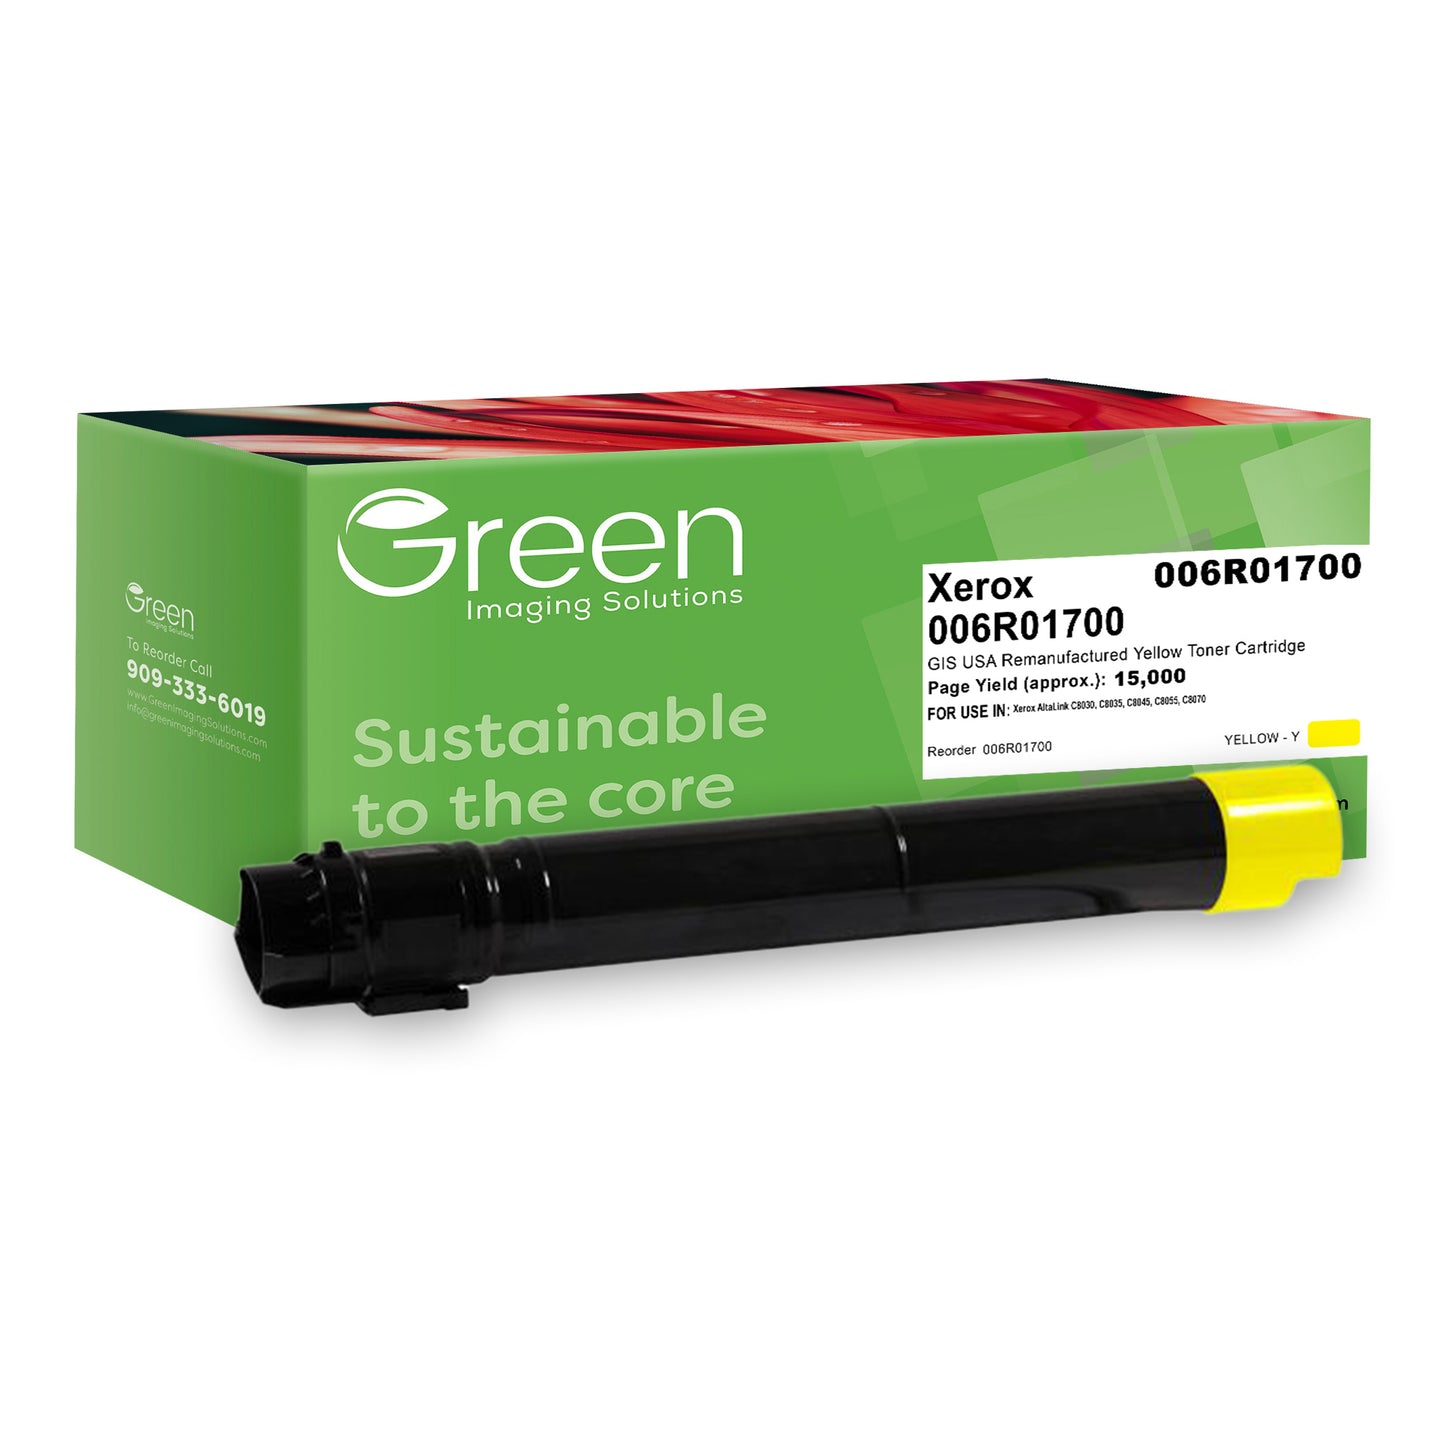 Green Imaging Solutions USA Remanufactured Yellow Toner Cartridge for Xerox  006R01700